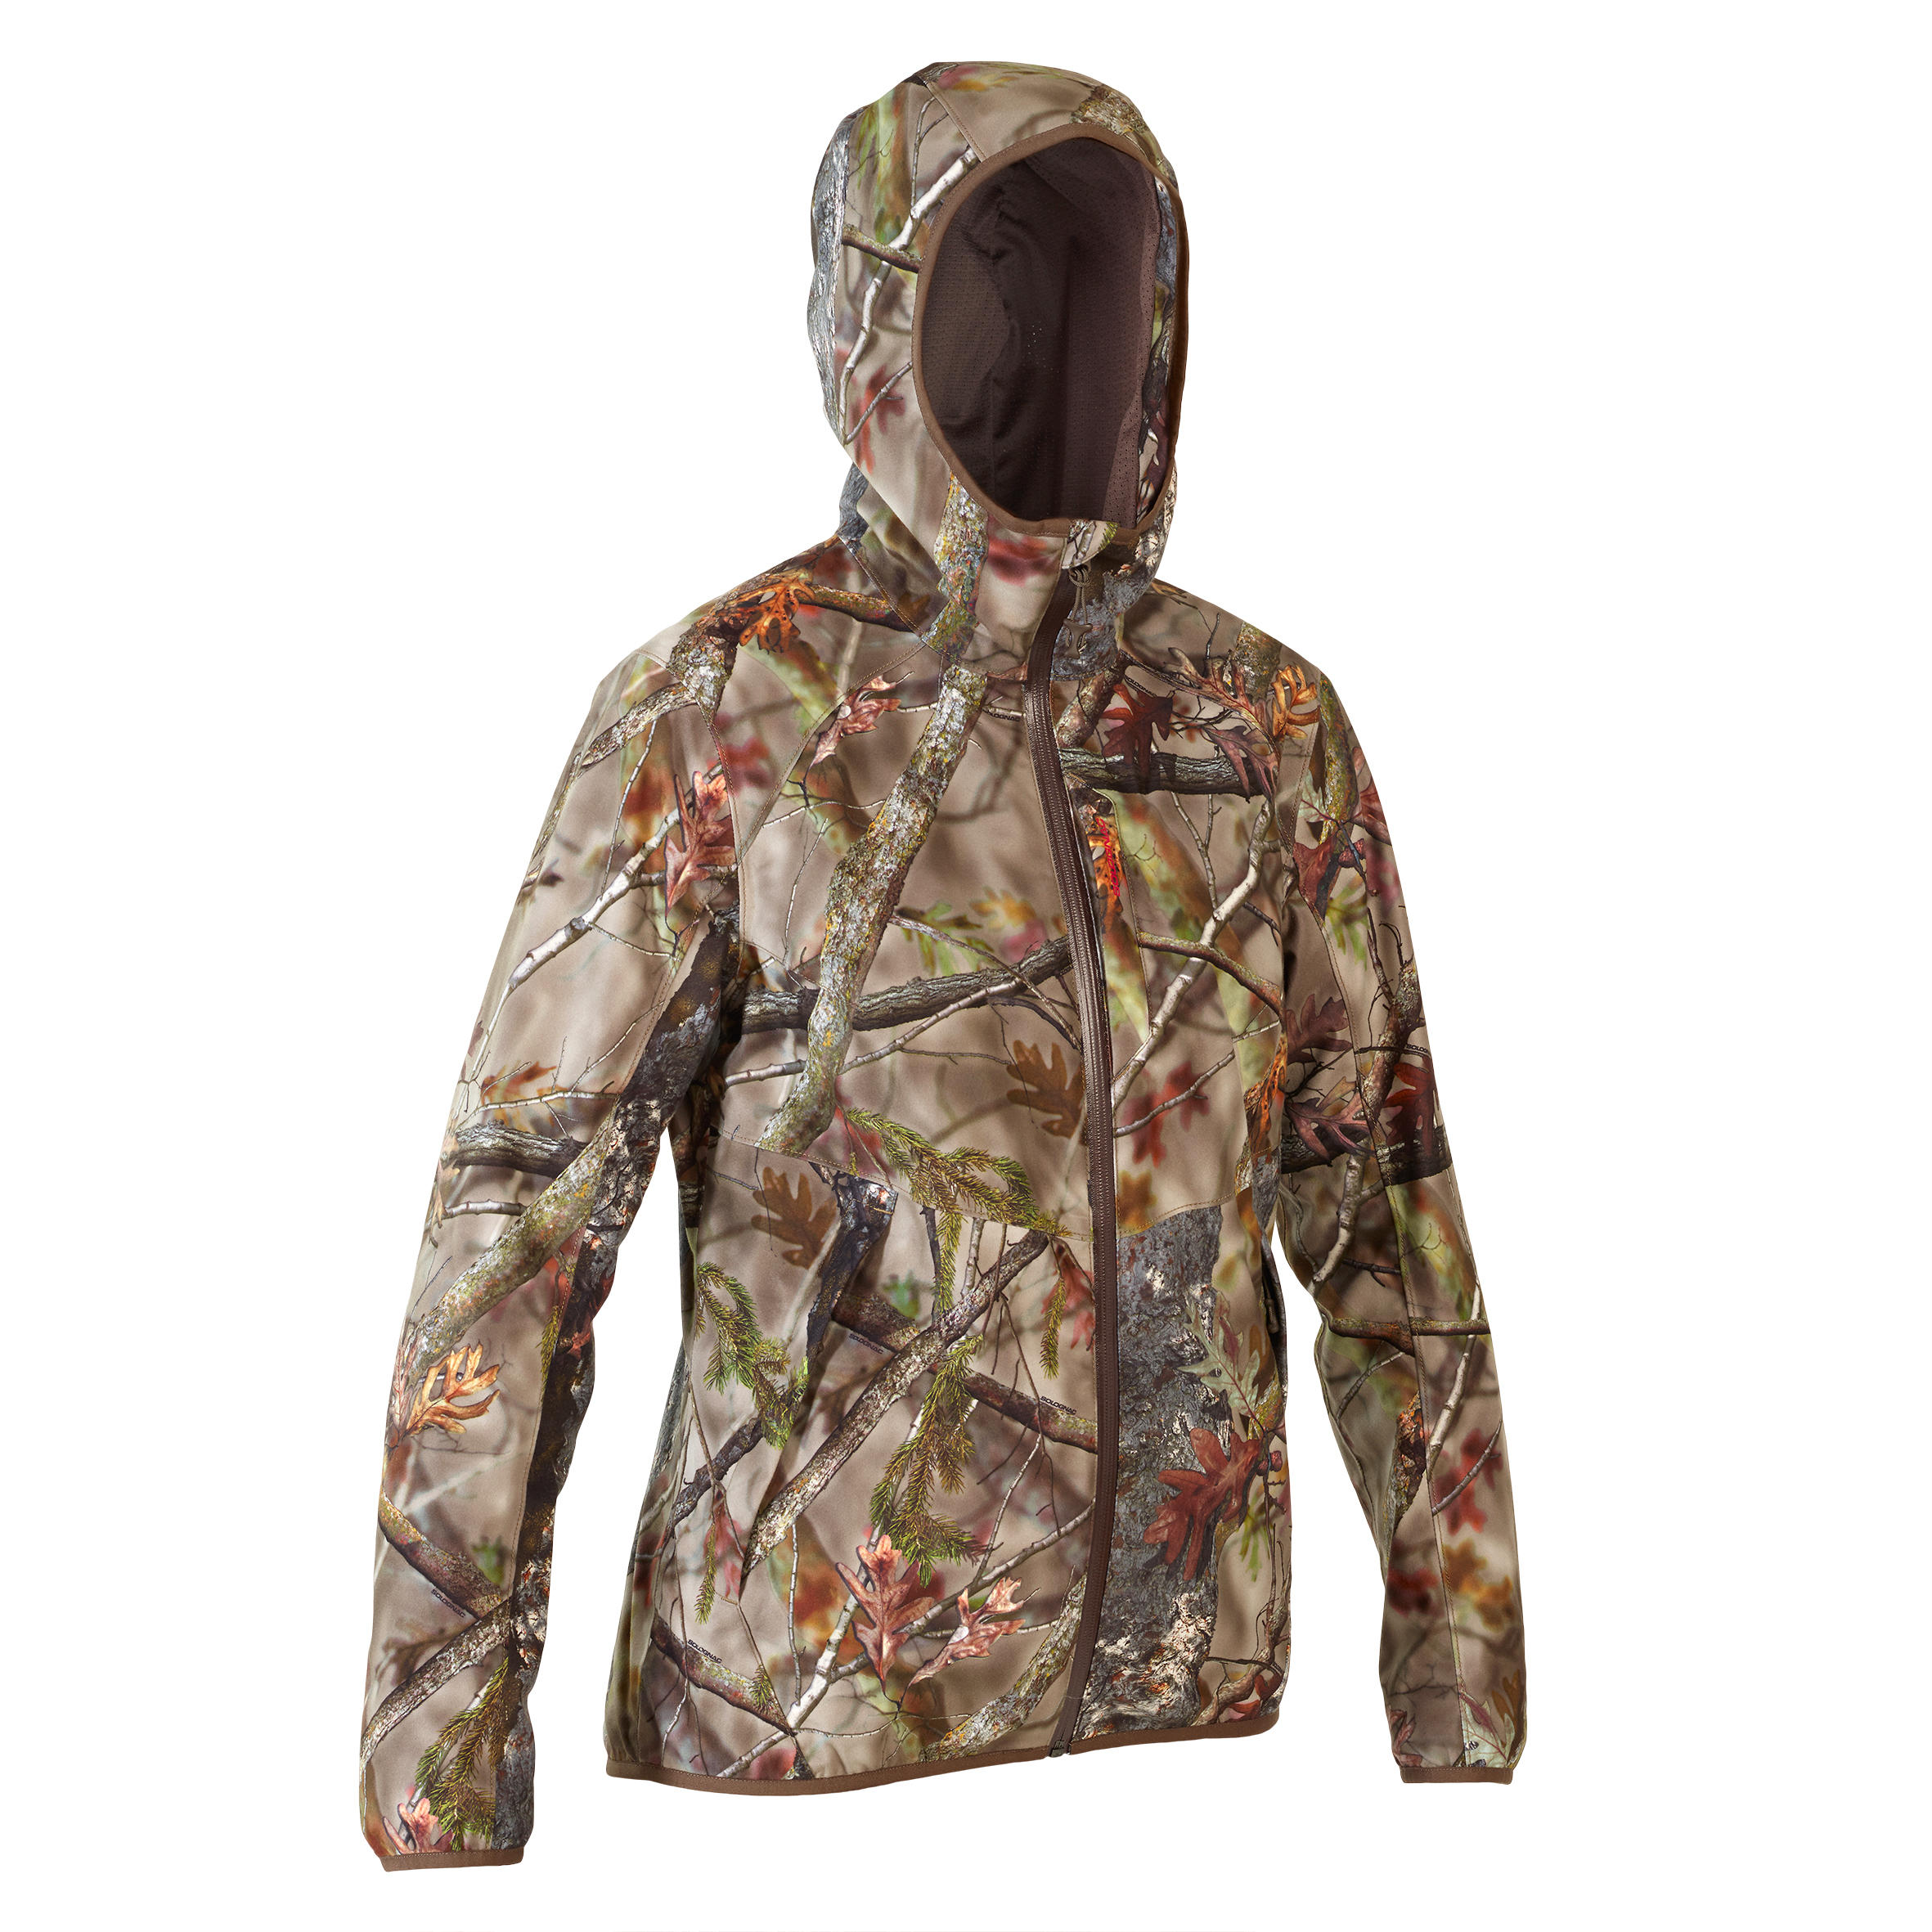 Women's Light, Silent and Breathable Jacket - Brown Camo 1/5